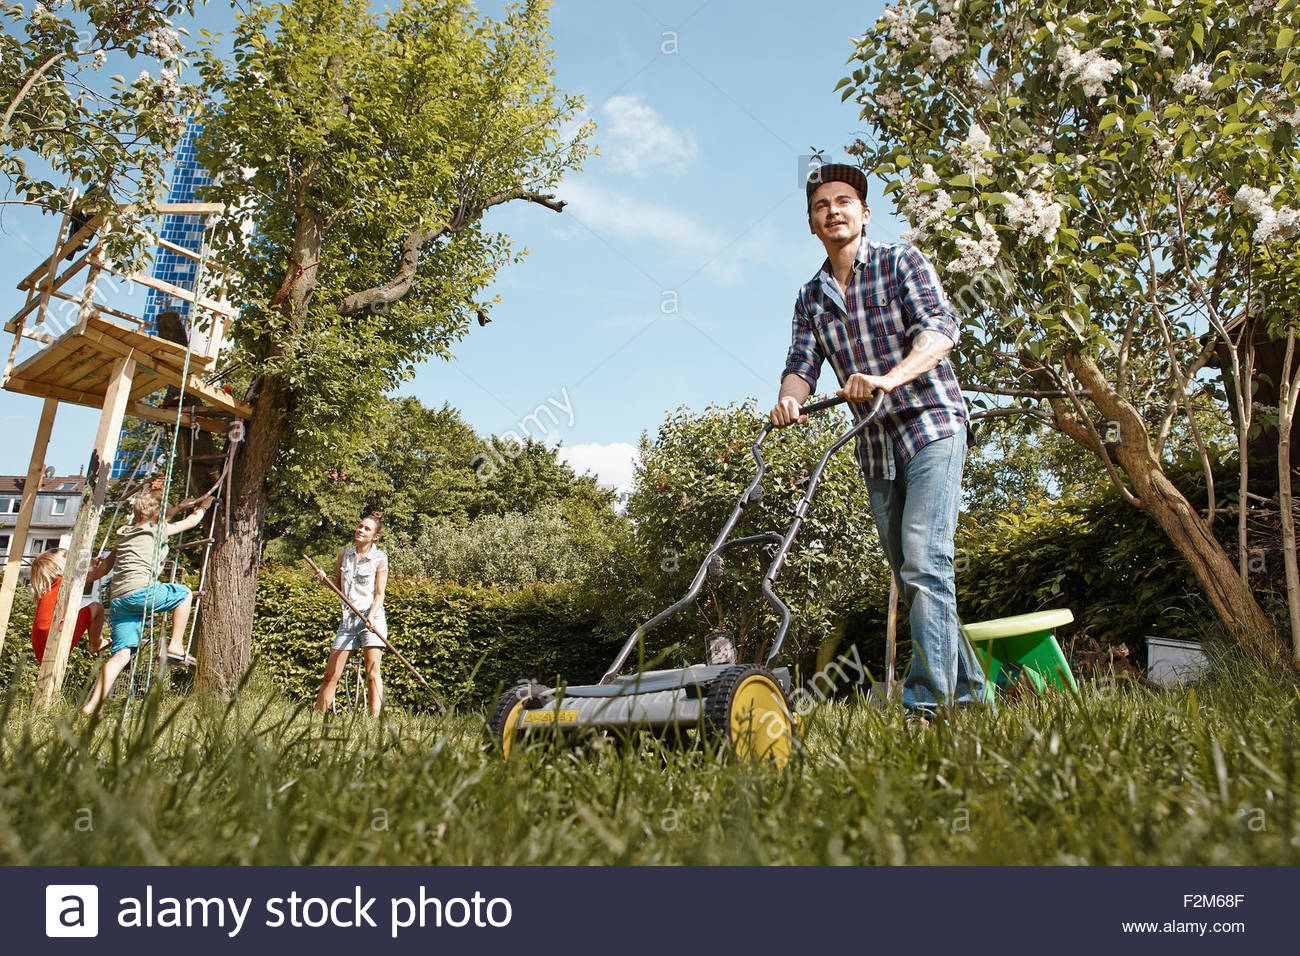 Man Mowing Lawn In Garden With Family Background Stock Photo